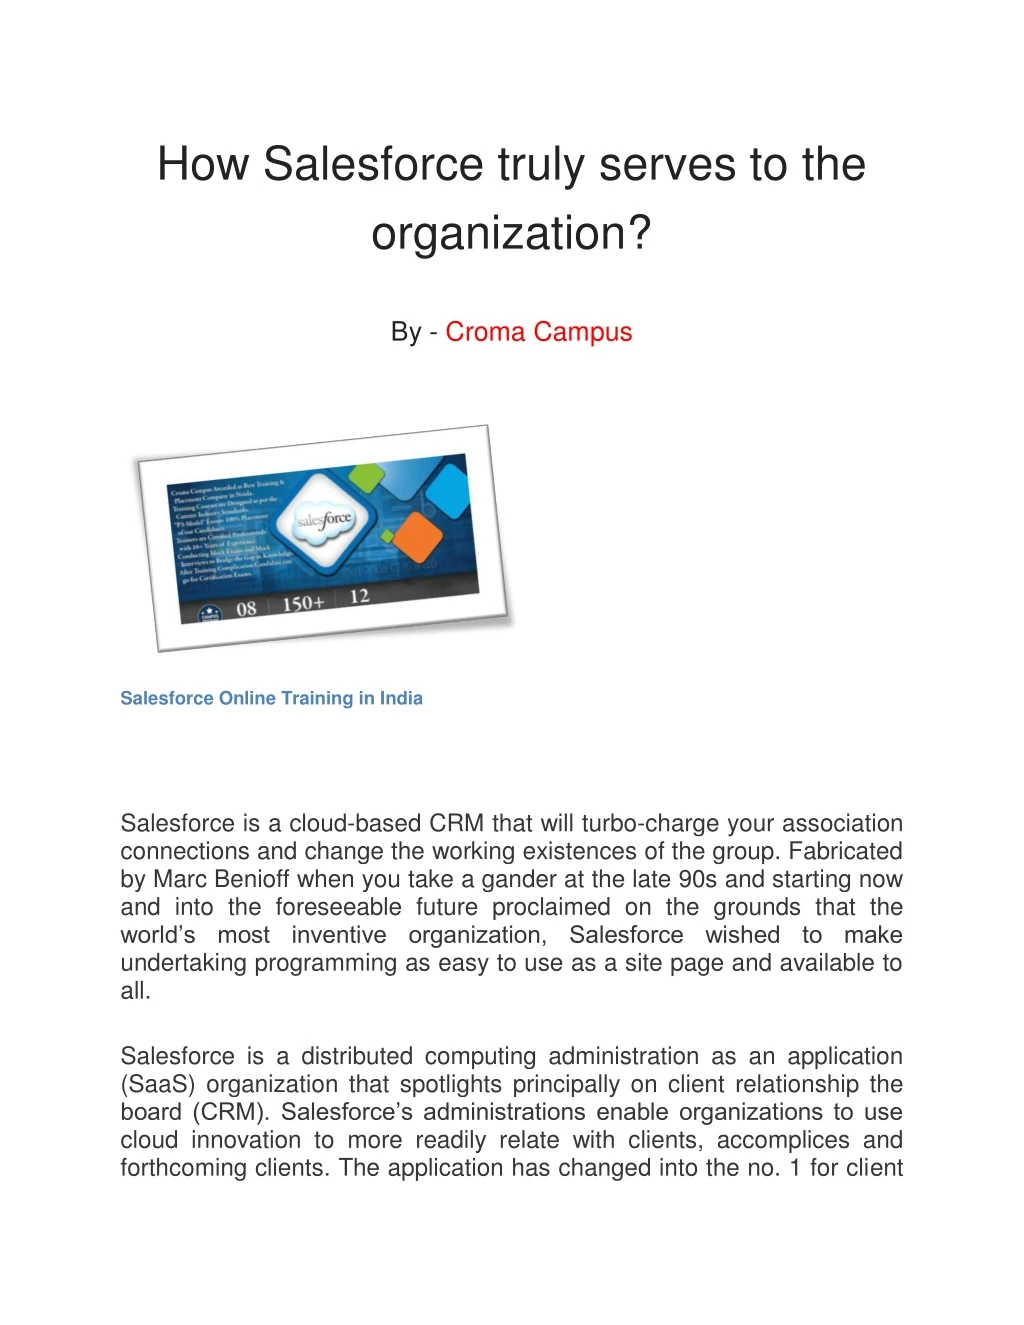 how salesforce truly serves to the organization